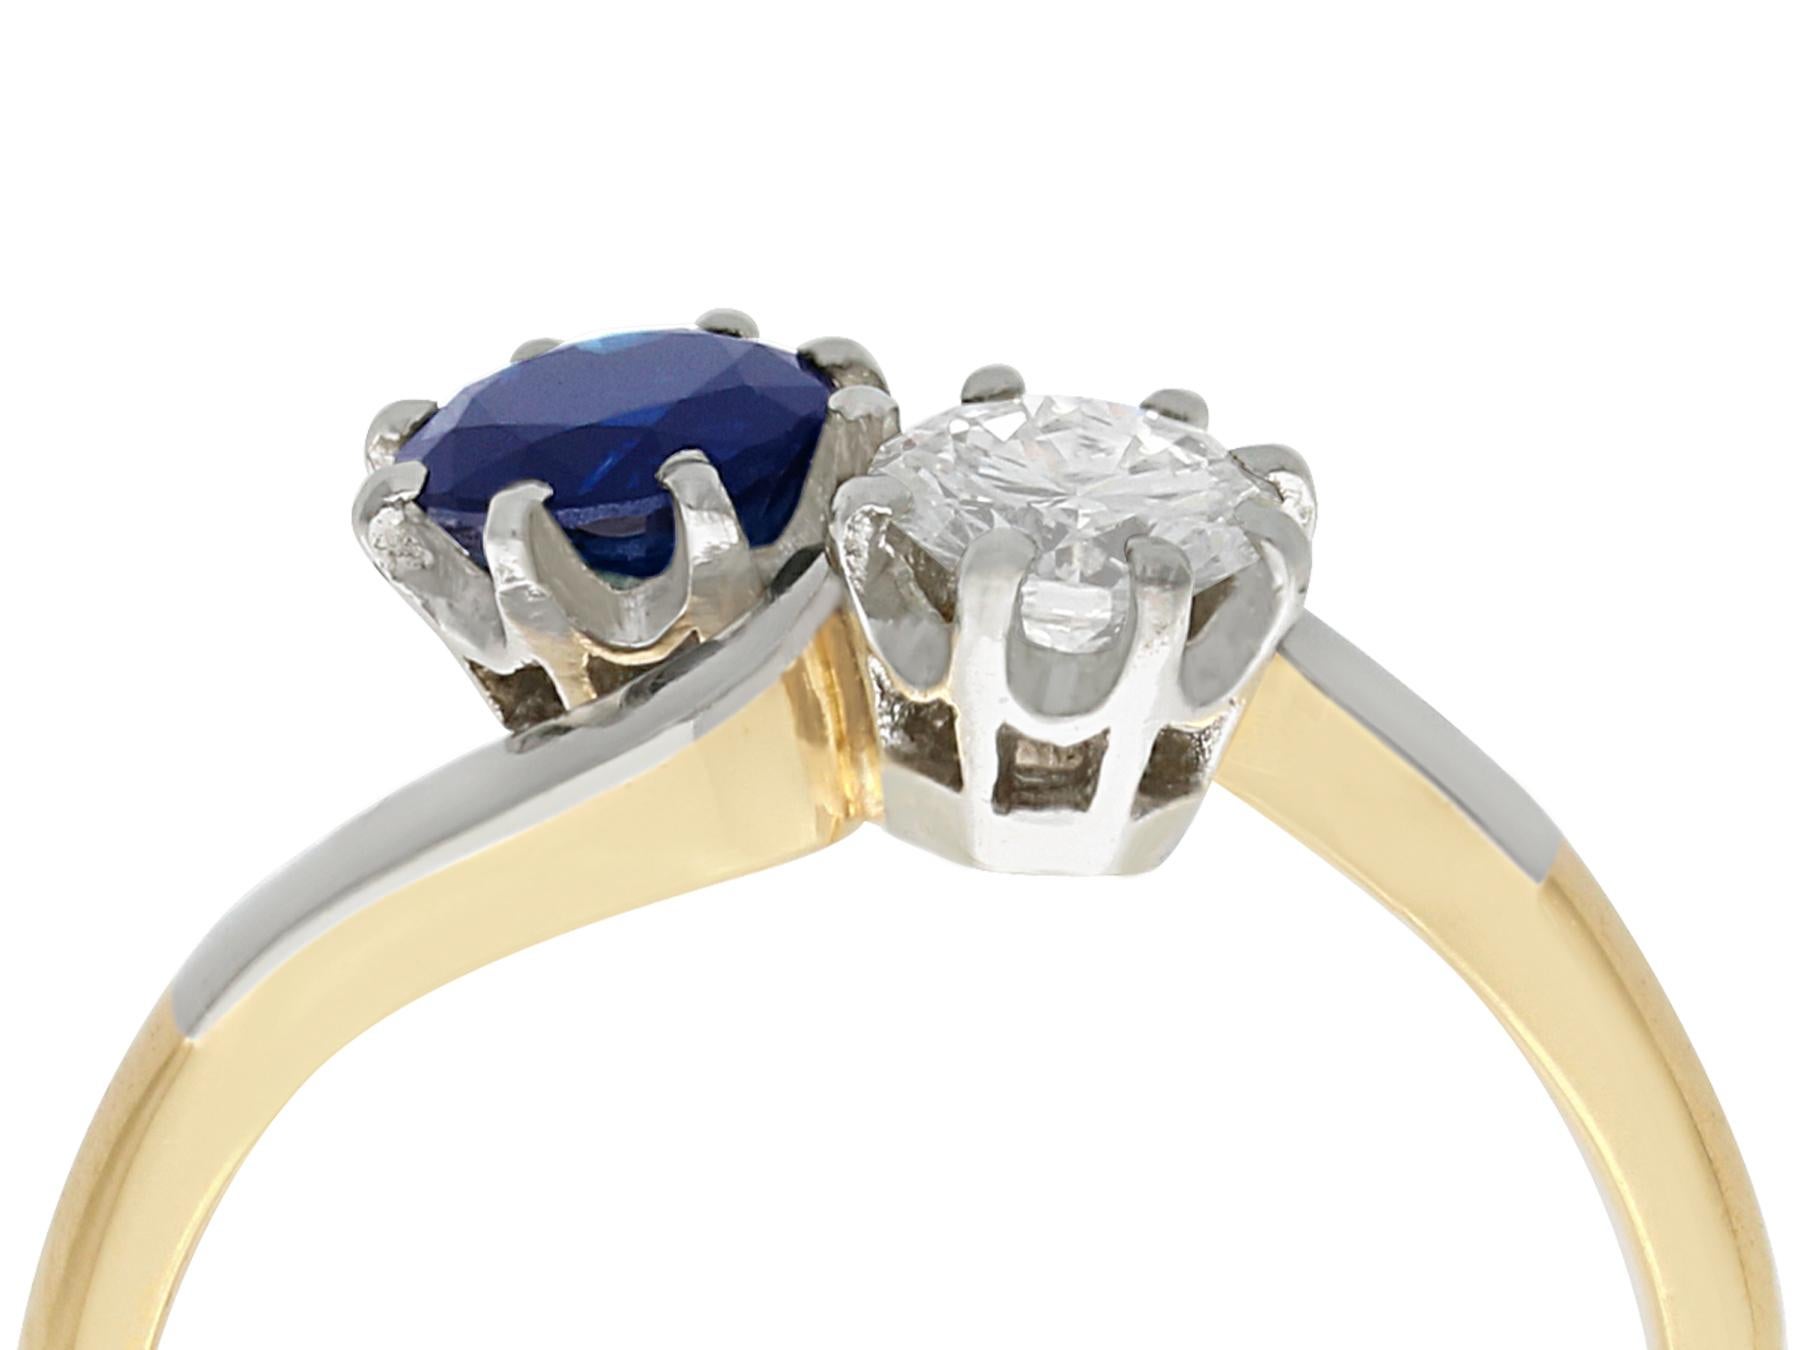 An impressive vintage 0.40 carat diamond and 0.72 carat sapphire, 18k yellow gold and platinum set twist ring; part of our diverse gemstone jewelry collections.

This fine and impressive sapphire and diamond twist ring has been crafted in 18k yellow